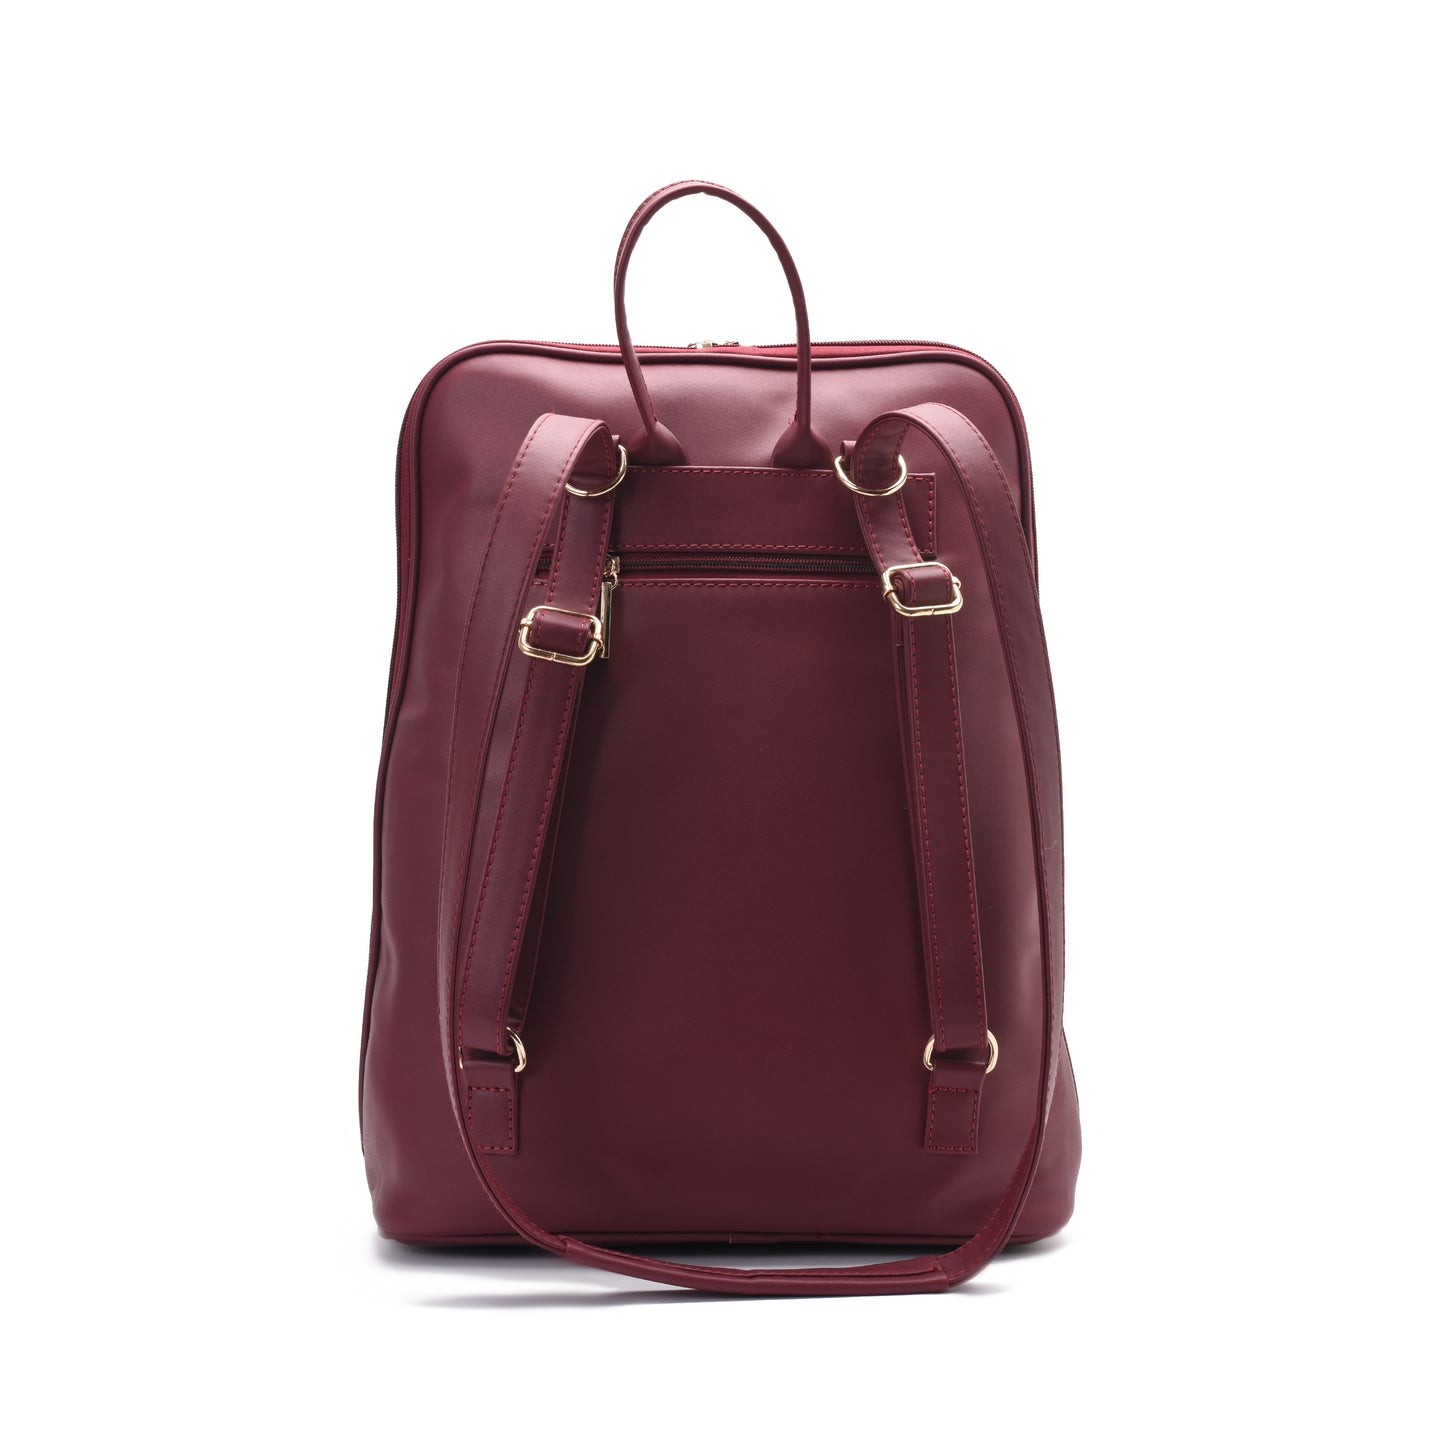 Laptop Burgundy with colourful fabric Backpack/Cross- Code 2003